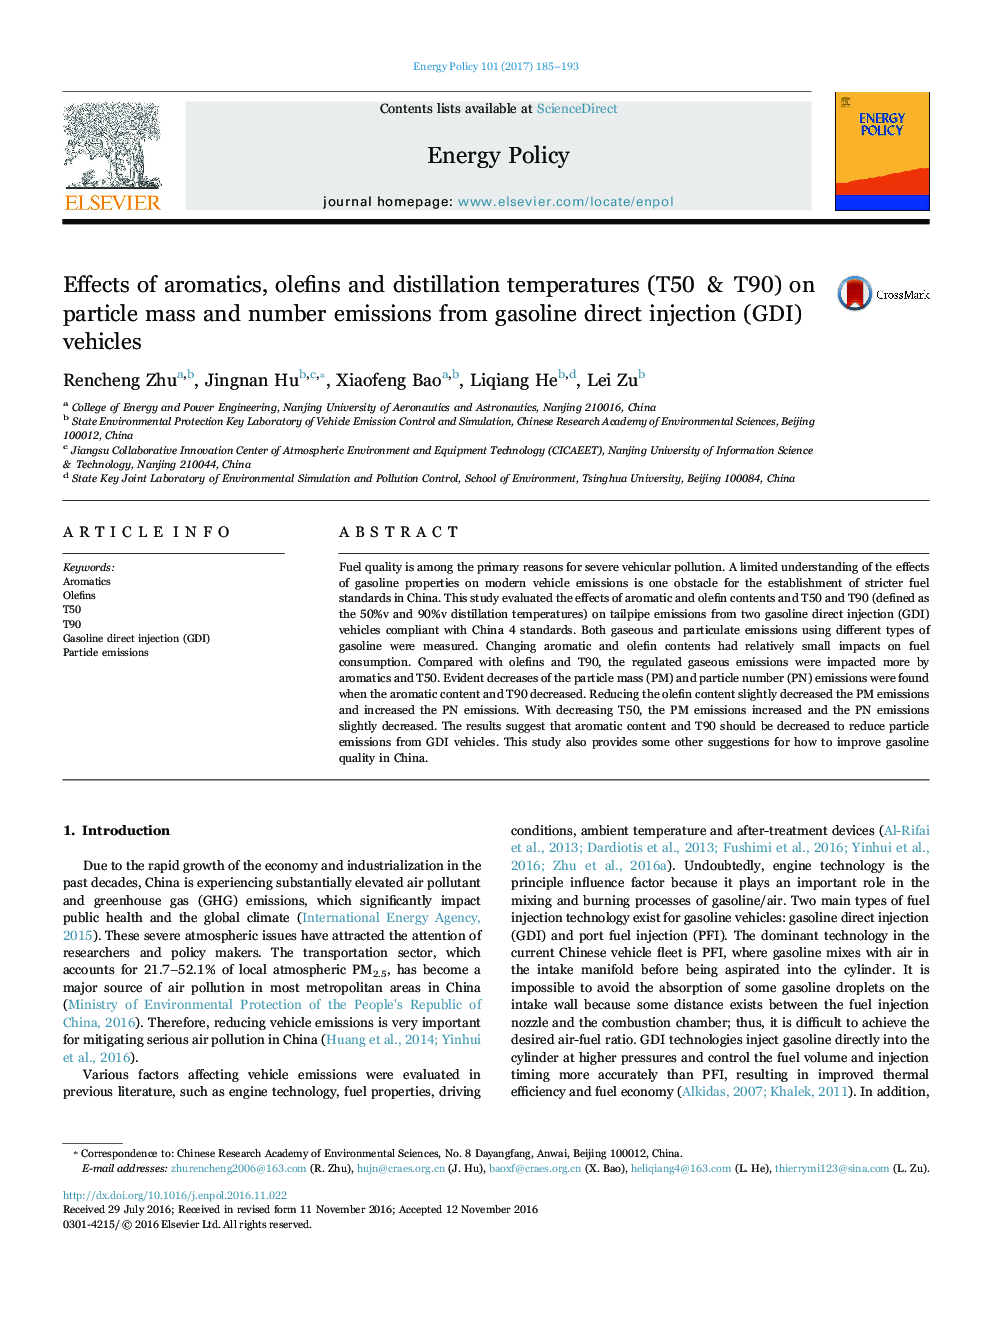 Effects of aromatics, olefins and distillation temperatures (T50 & T90) on particle mass and number emissions from gasoline direct injection (GDI) vehicles